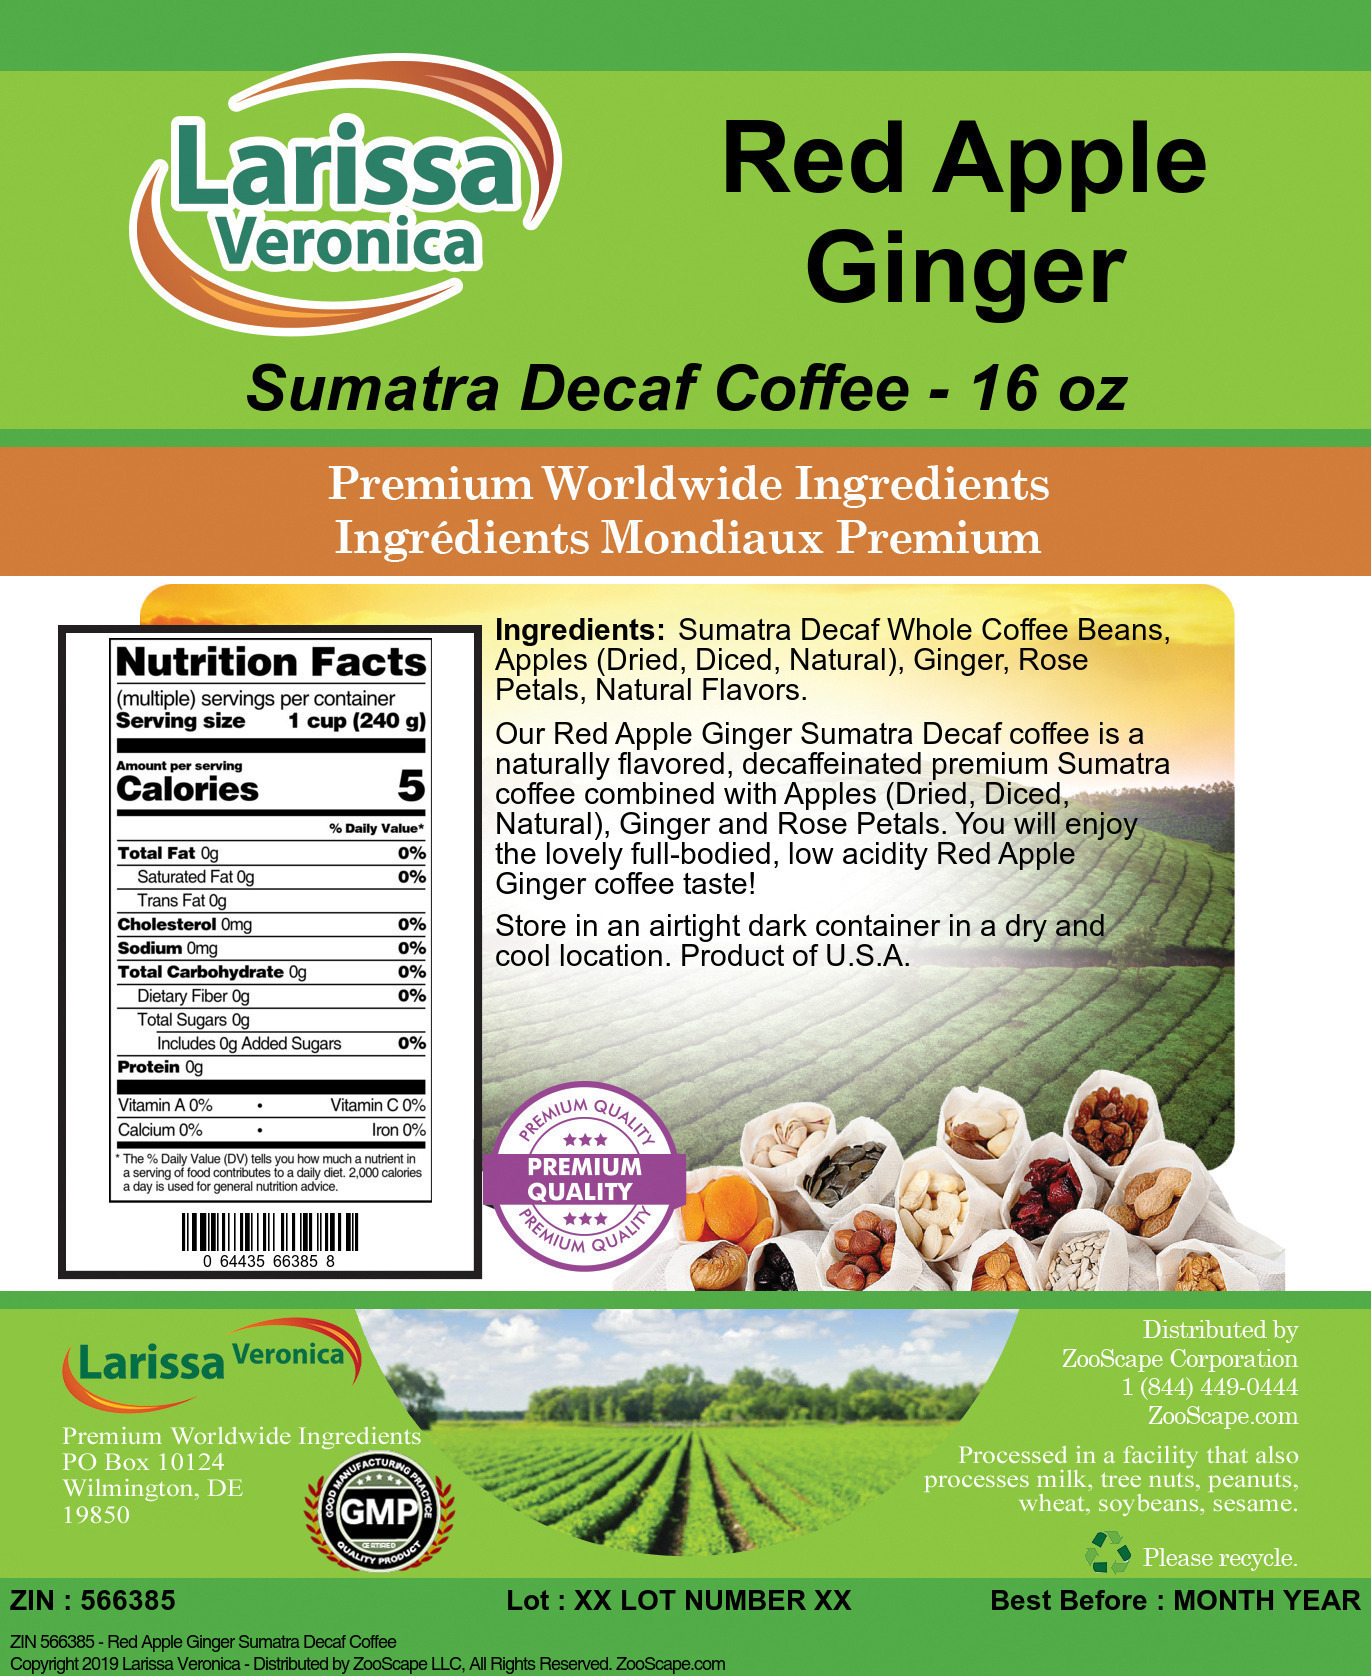 Red Apple Ginger Sumatra Decaf Coffee - Label